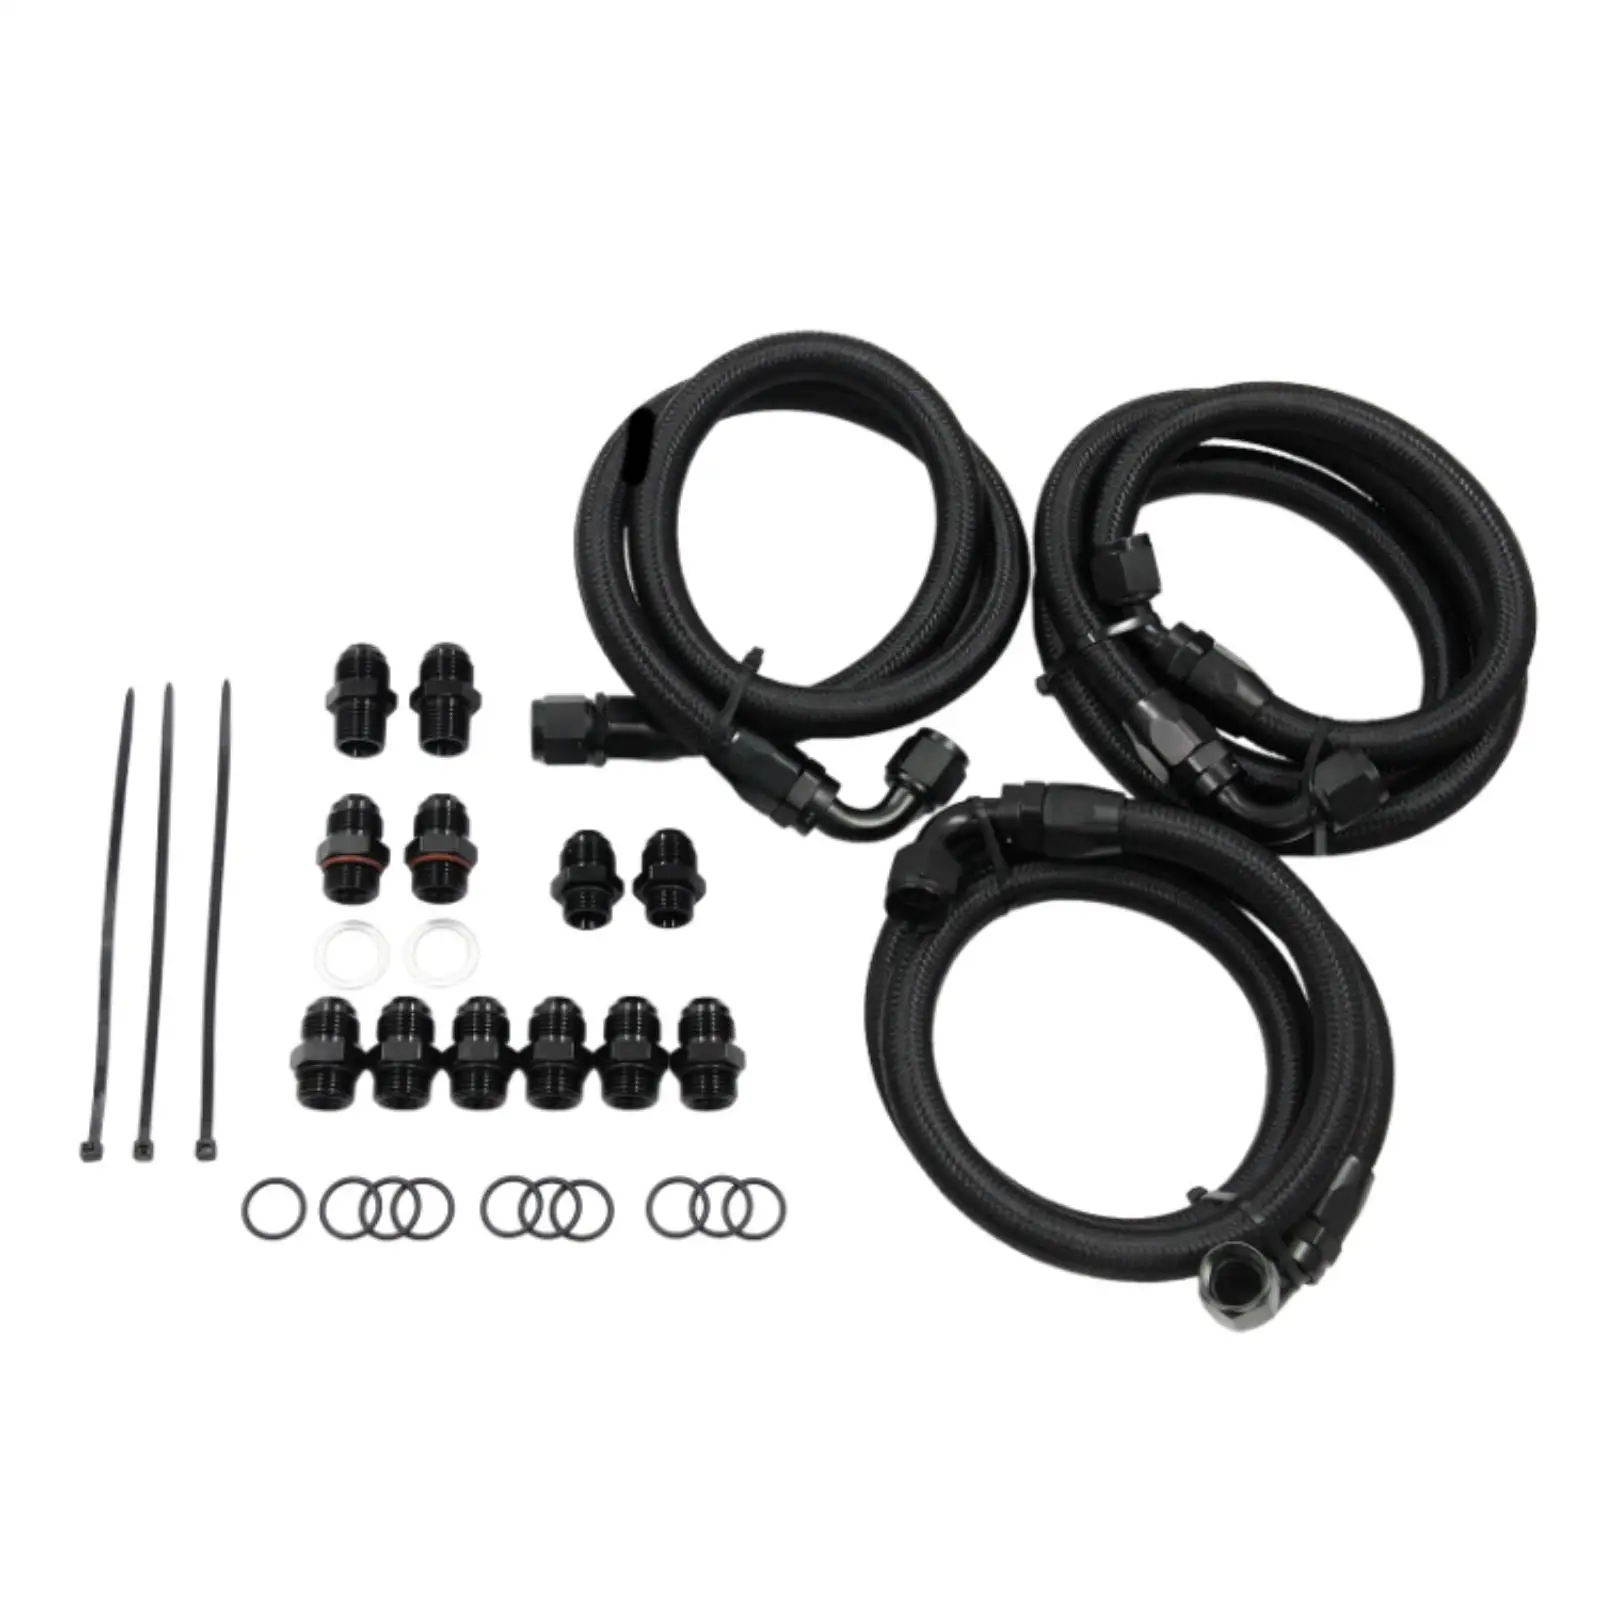 Transmission Cooler Lines Kit Prevent Leaks with Adapters Heavy Duty Transmission Cooler Hose Fittings for GM 2001 to 2005